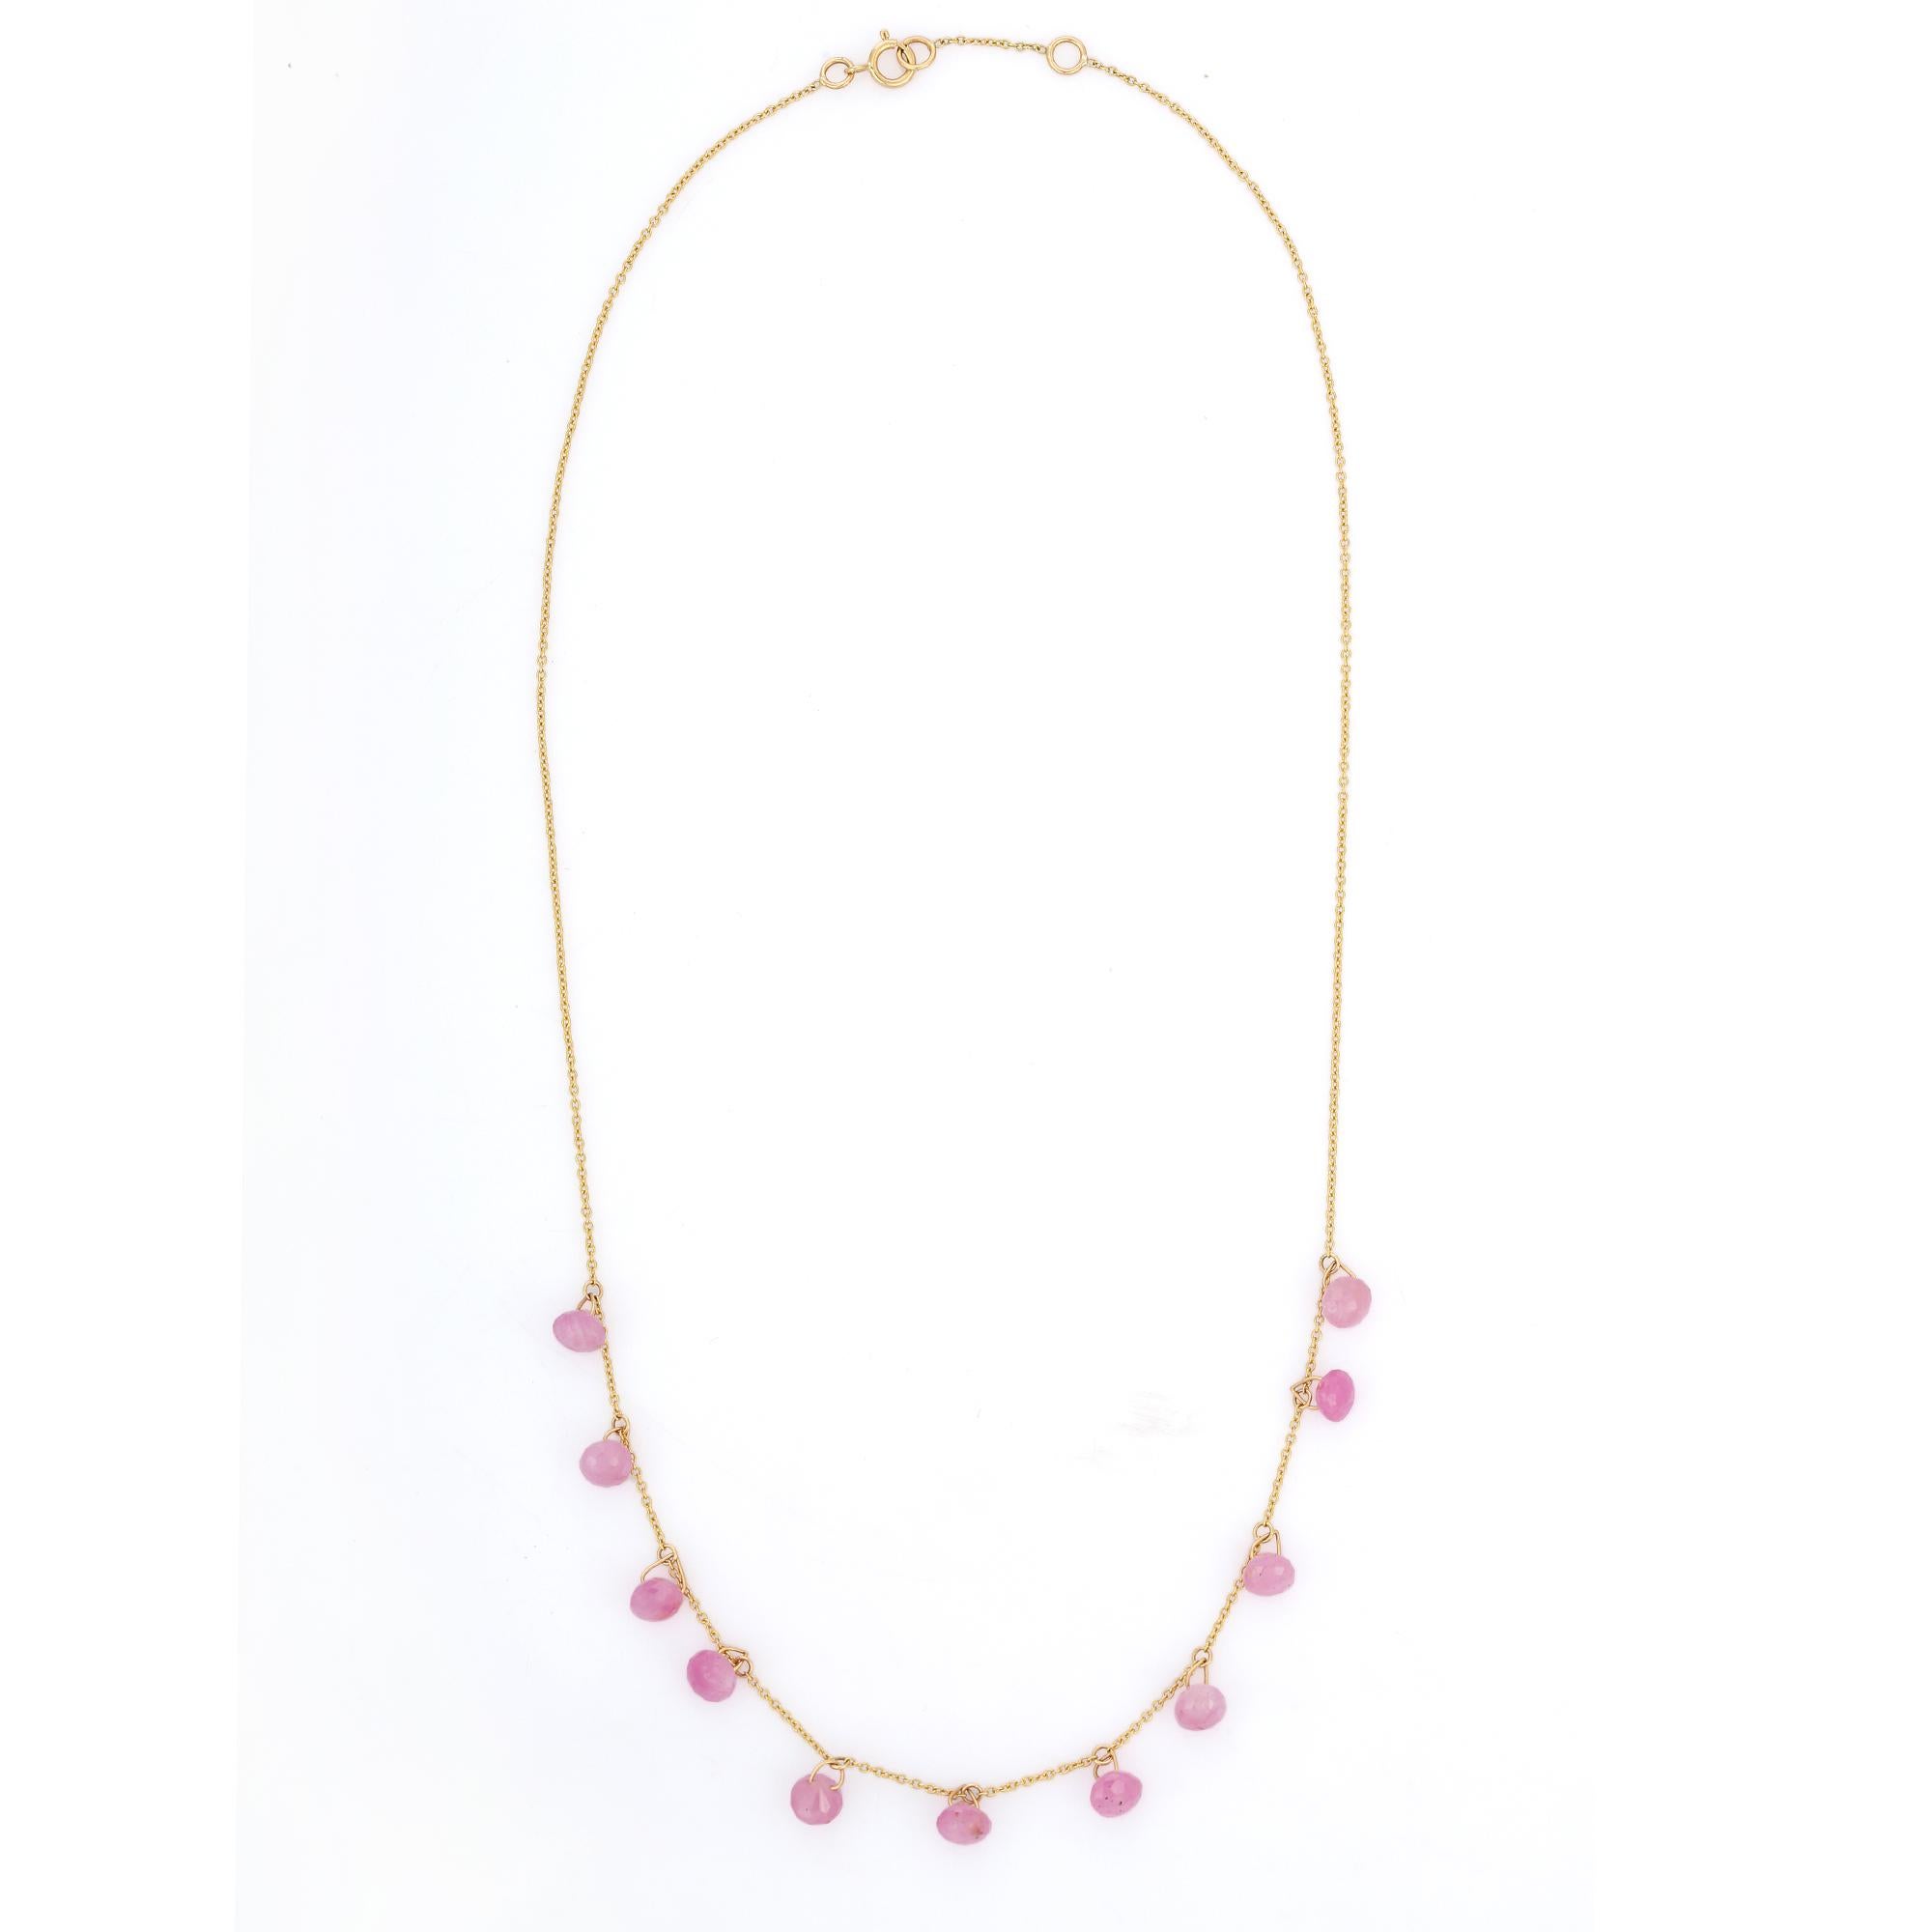 Women's 11.5 Carat Pink Sapphire Drop Necklace in 18K Yellow Gold